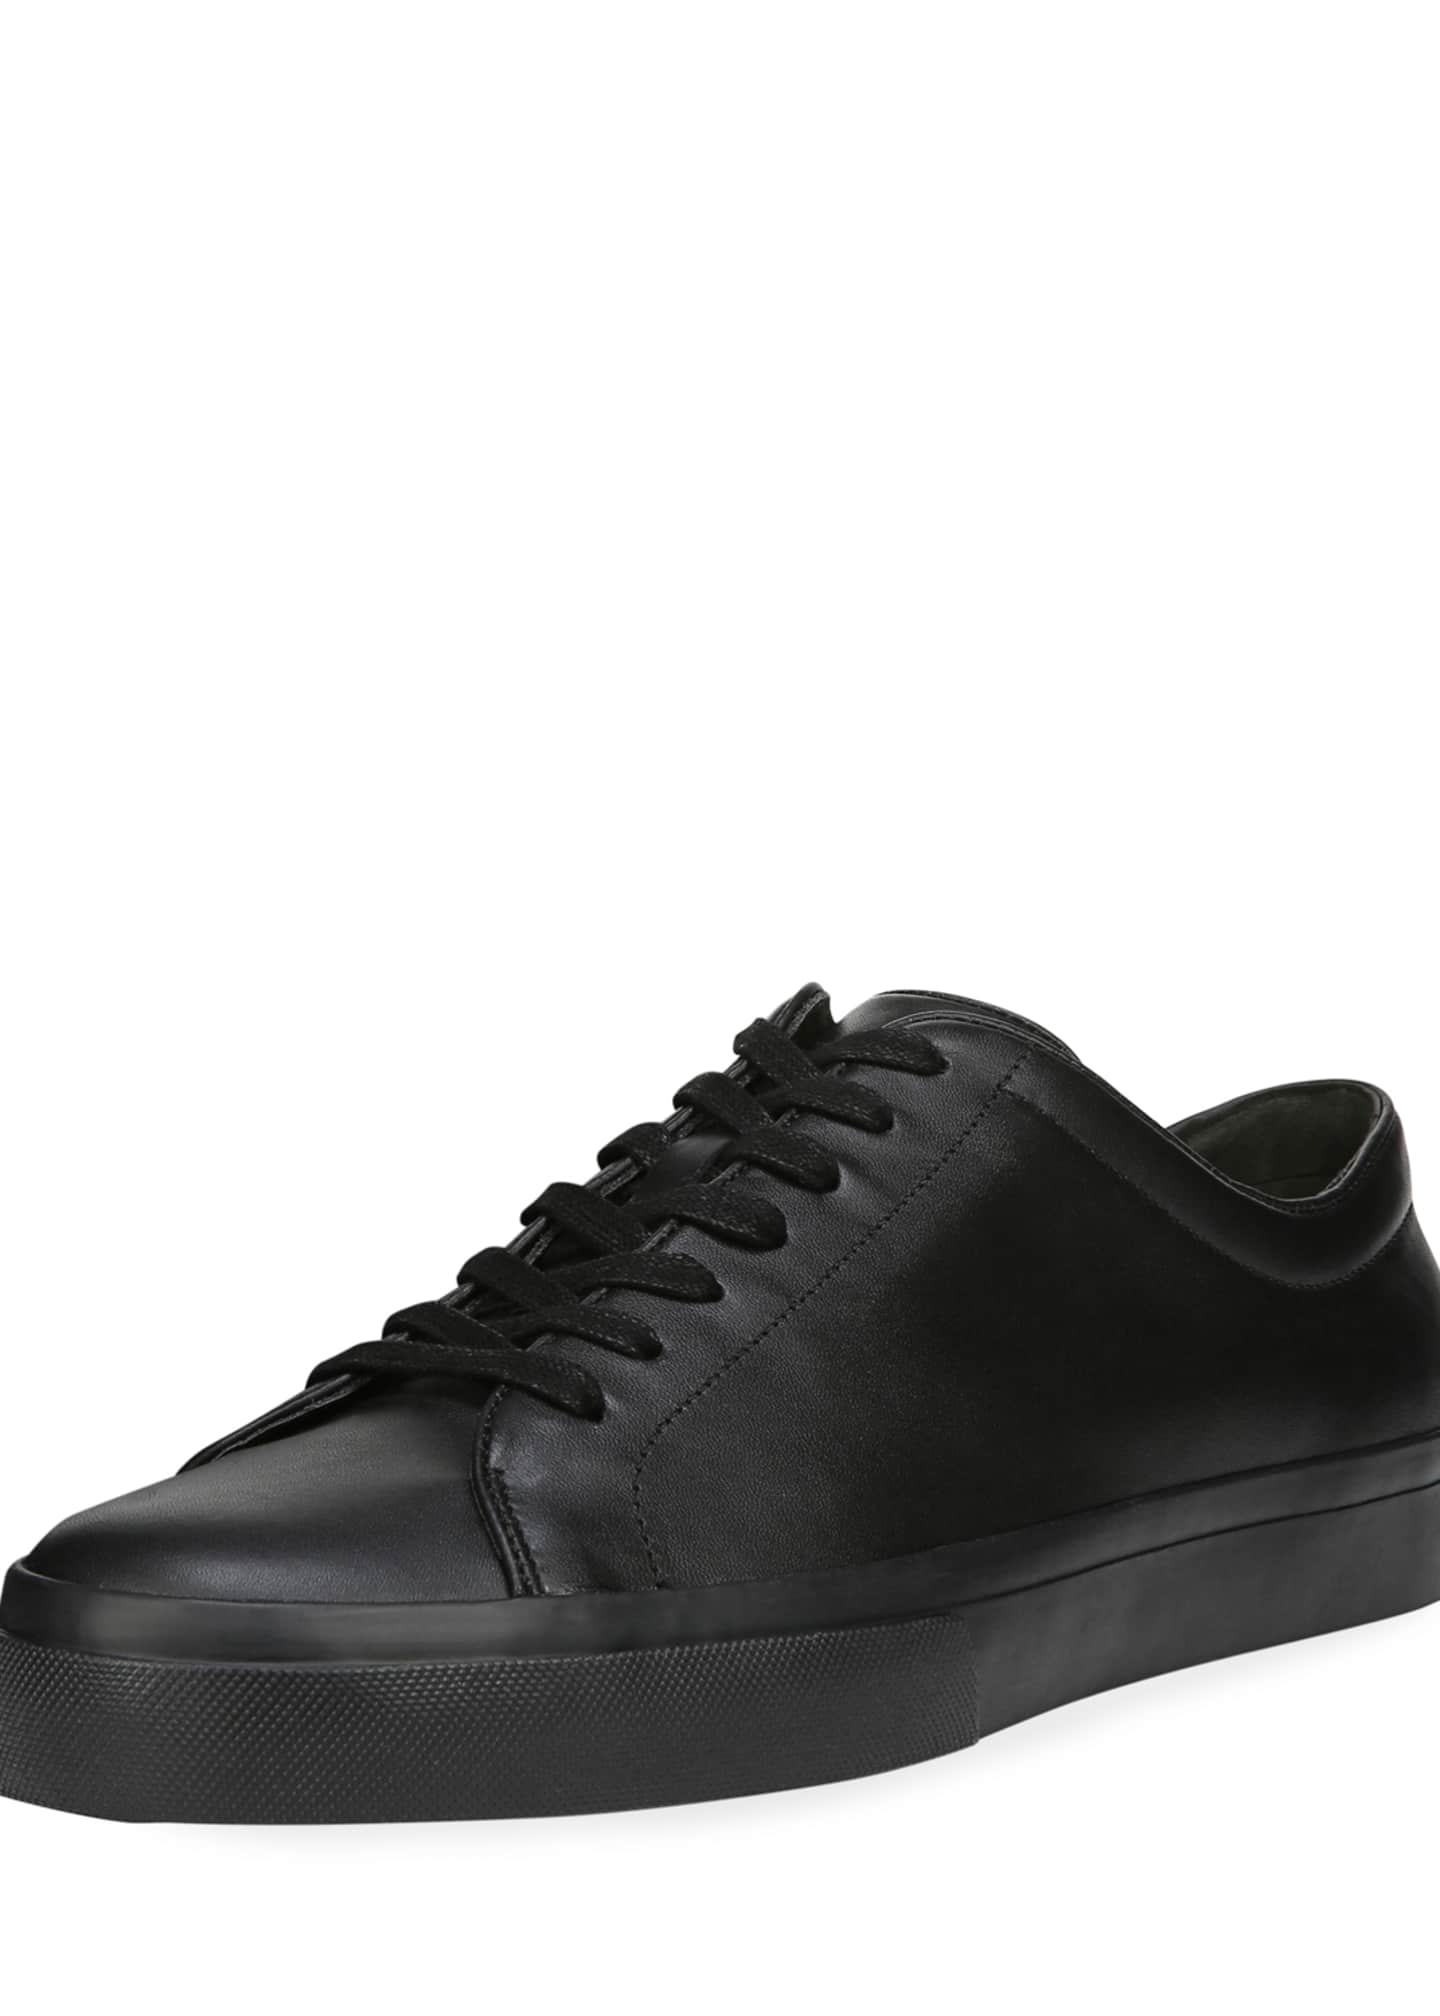 Vince Men's Farrell Maddox Leather Low-Top Sneakers - Bergdorf Goodman